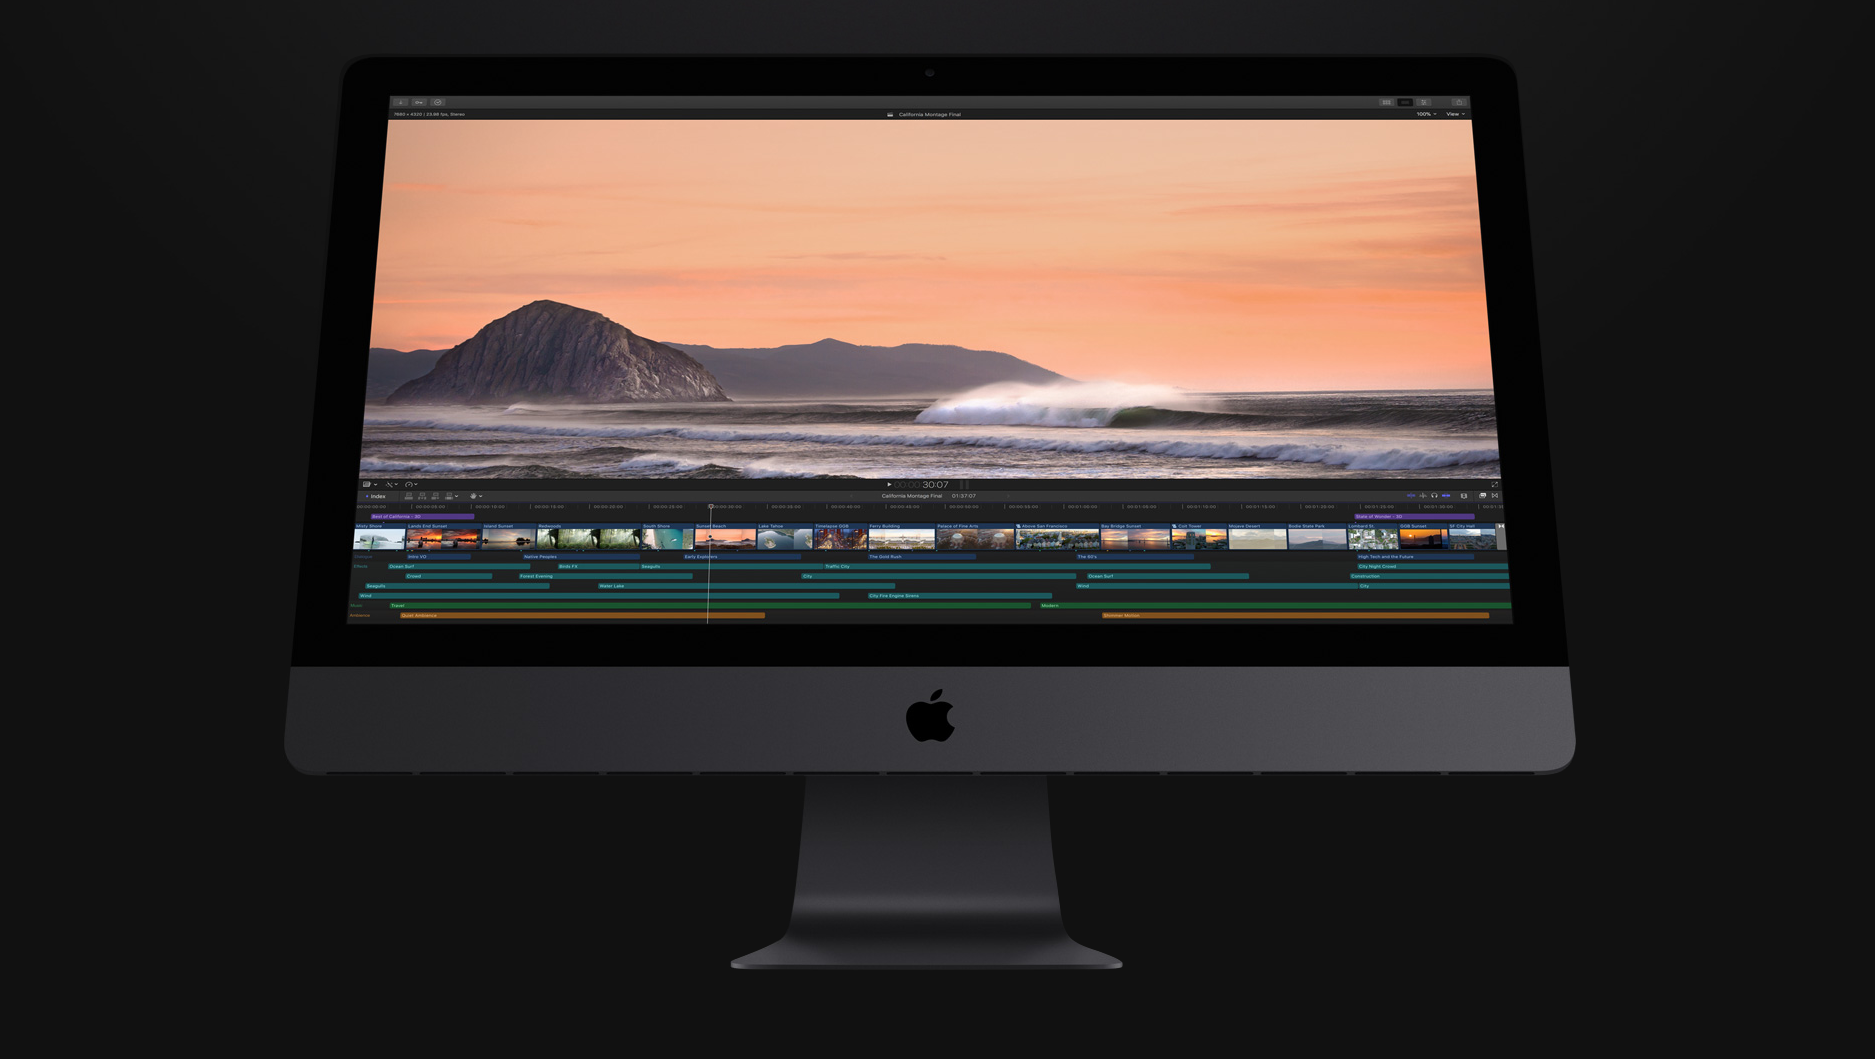 is final cut pro 10.3.4 compatible with majave